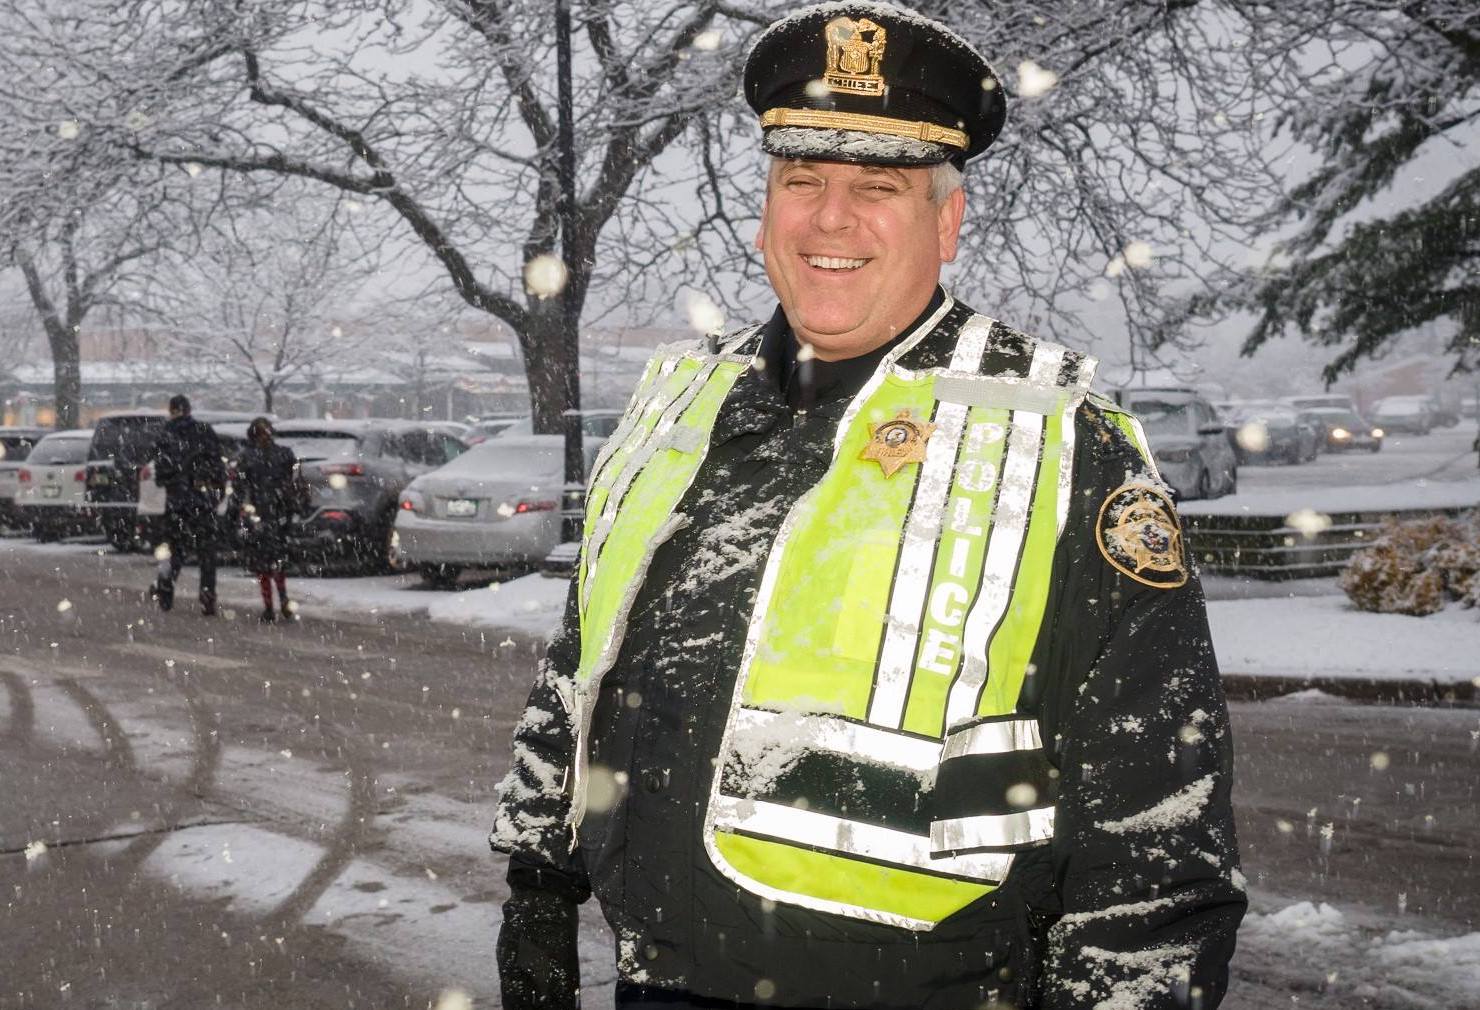 Northfield's longtime police chief Bill Lustig on medical leave The